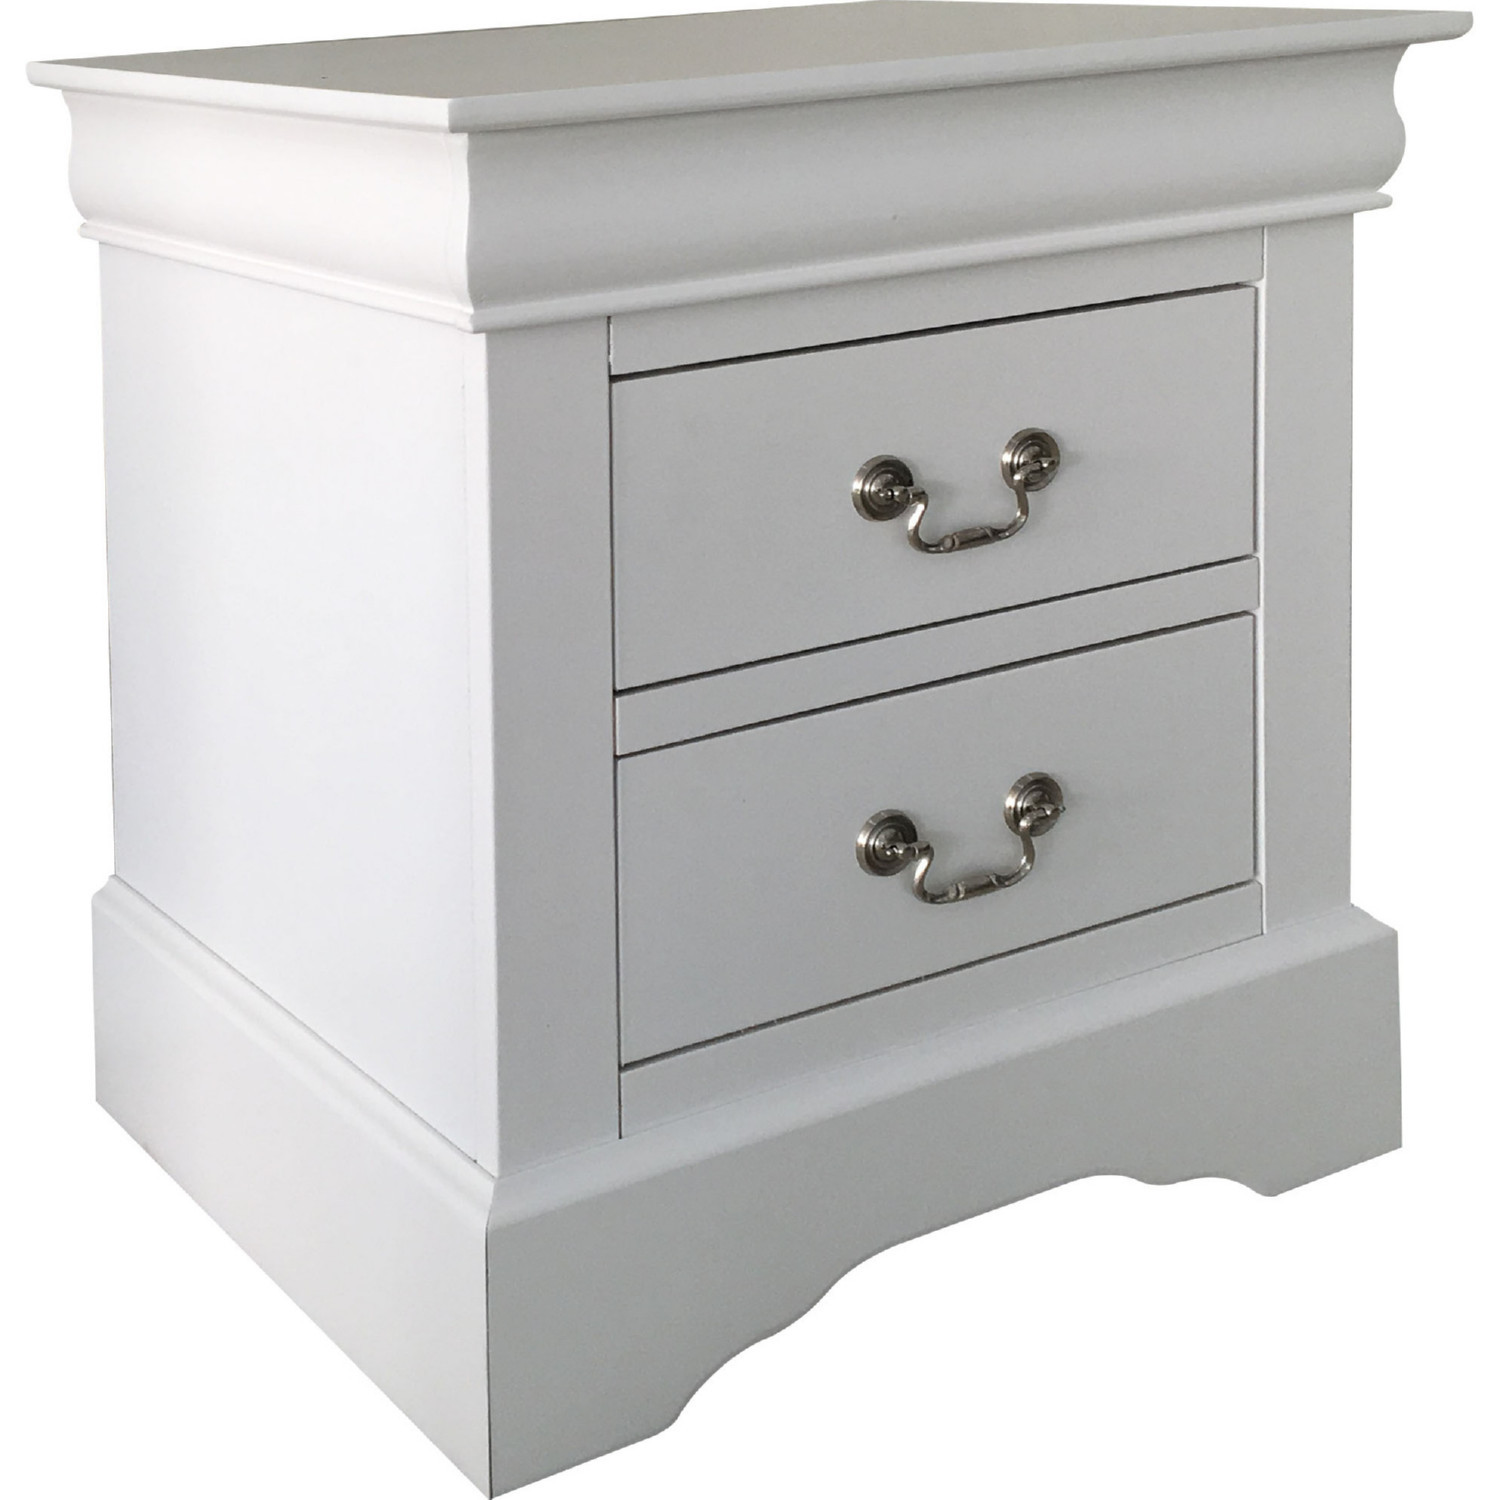 ACME Louis Philippe III Nightstand in White 24503 - Bedroom Sets